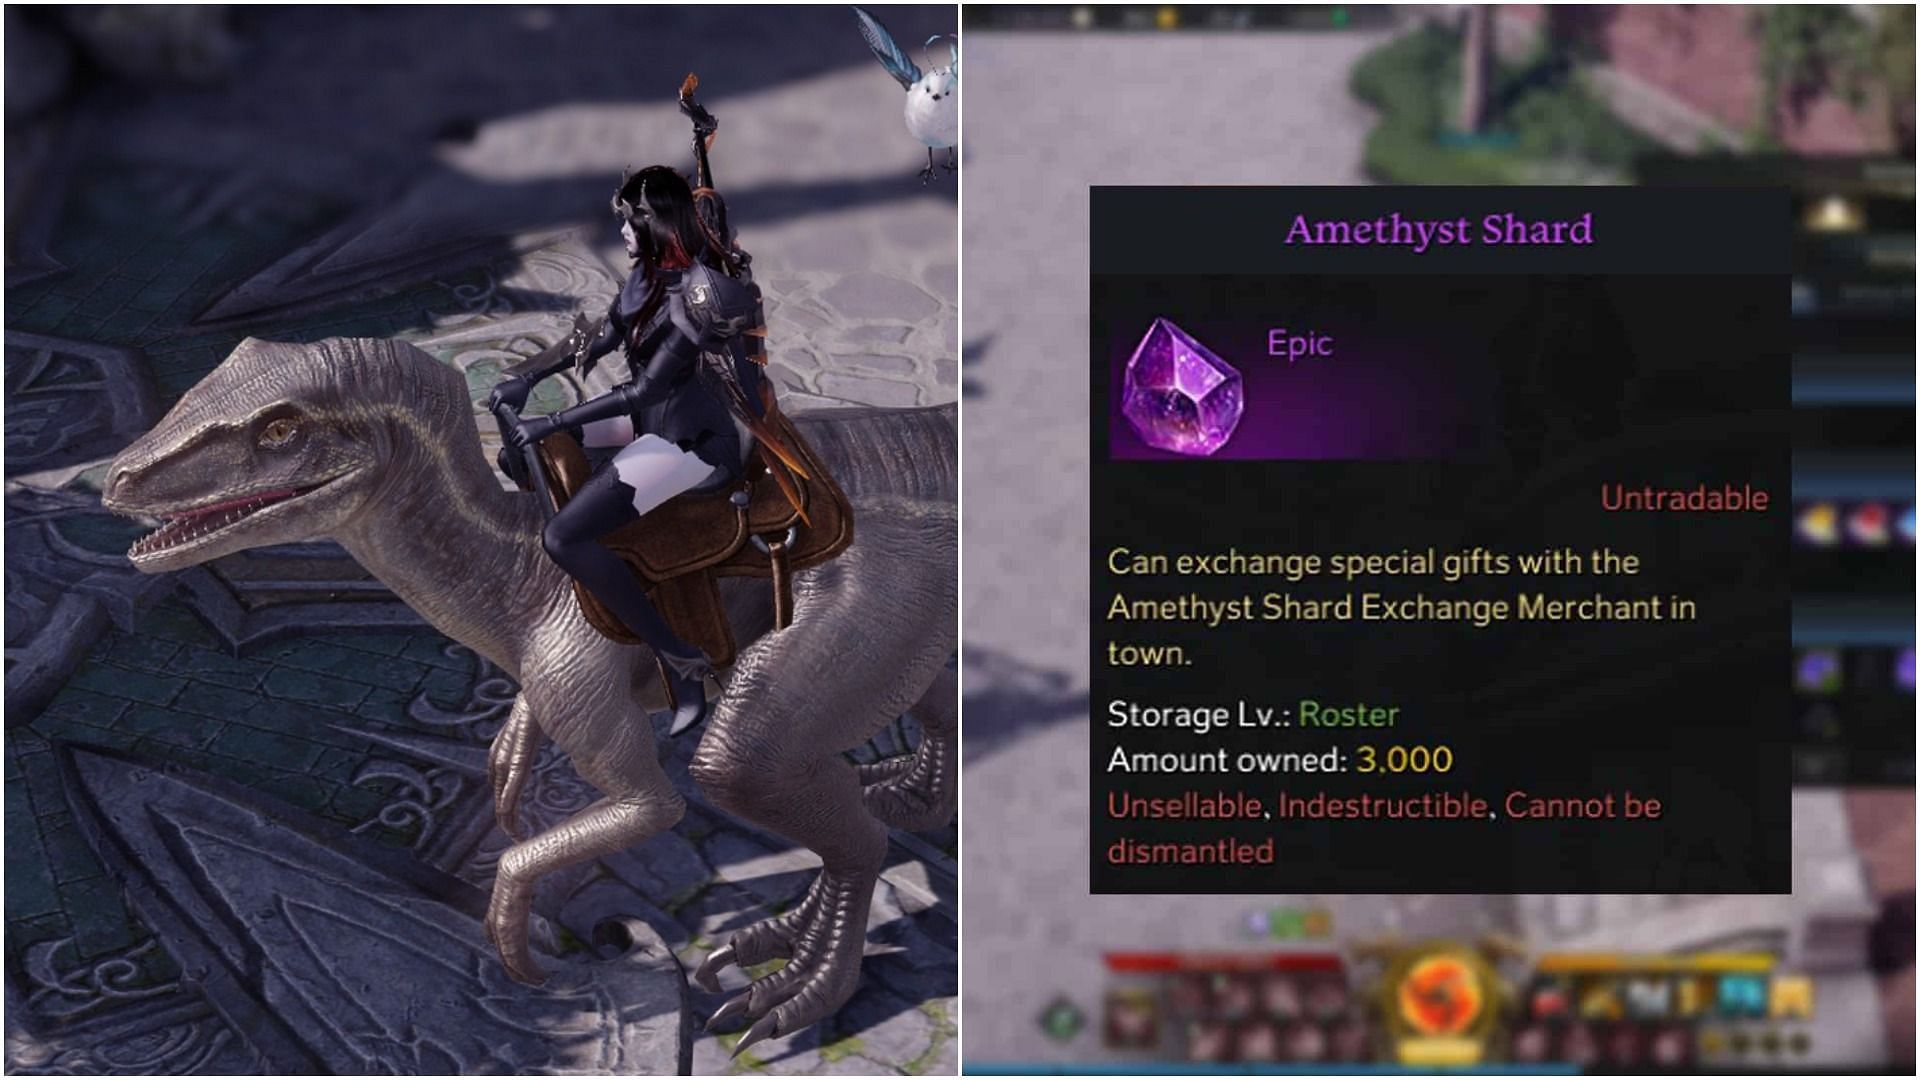 Amethyst Shards are valuable resources that allow players to earn interesting items (Images via Lost Ark)